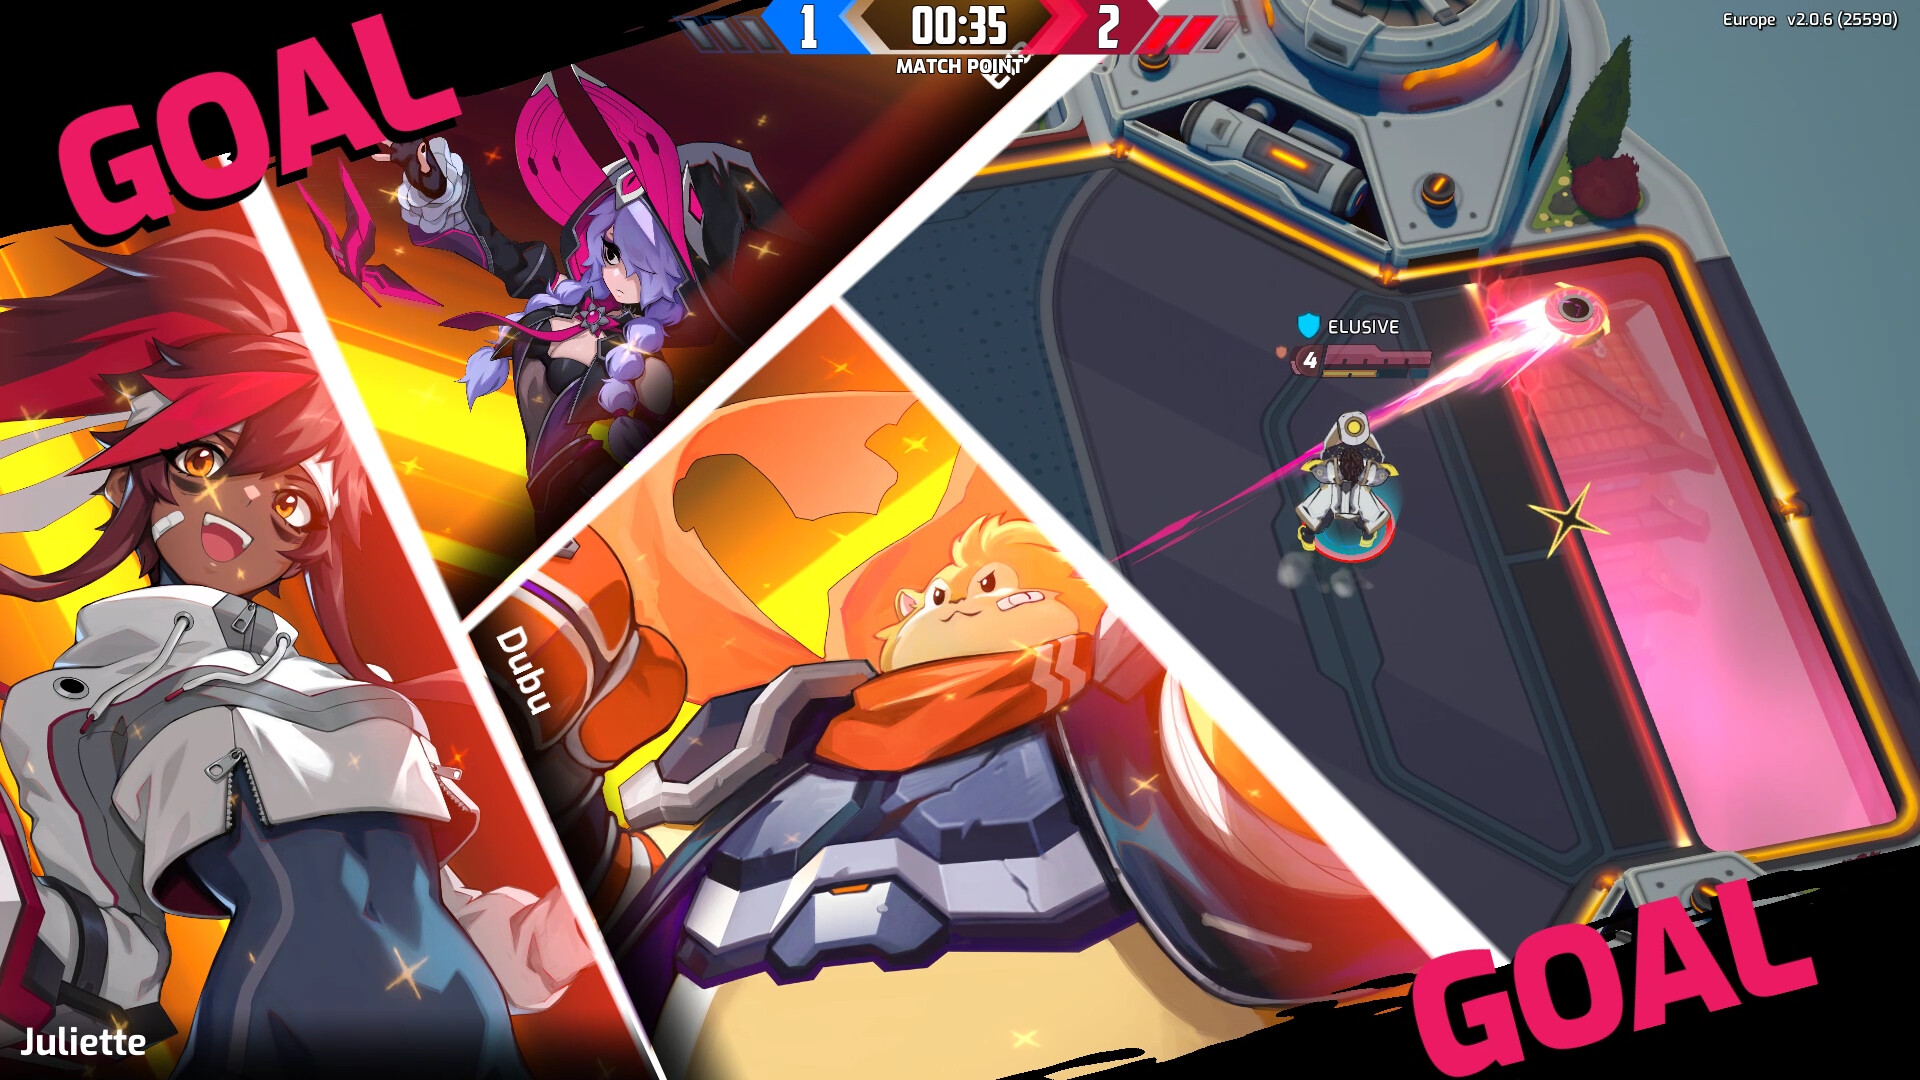 IDCGames - Omega Strikers - PC Games